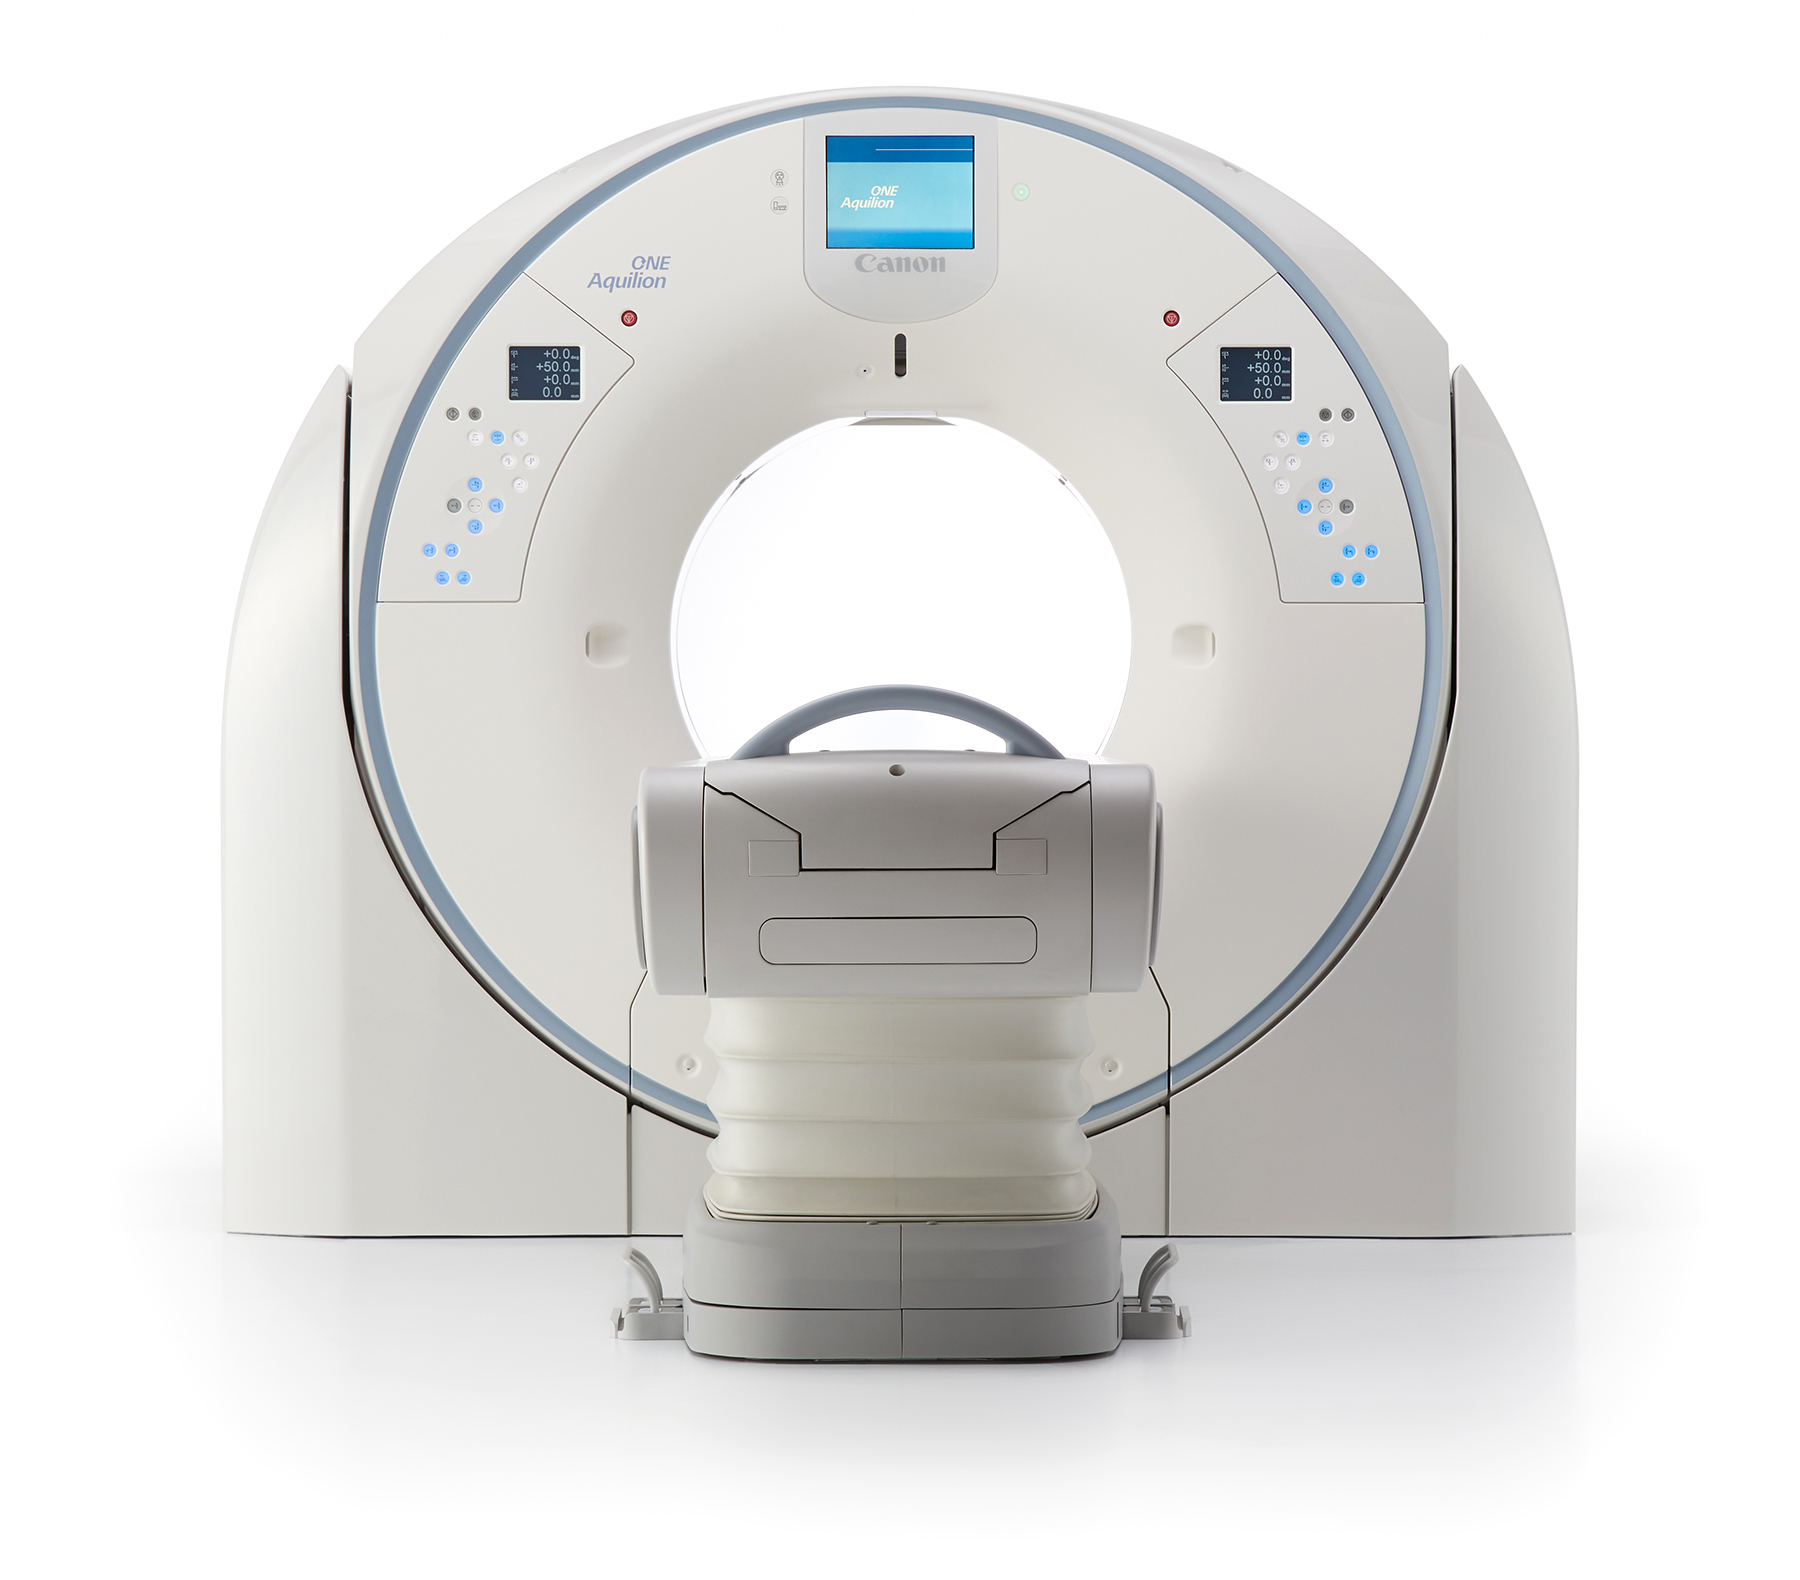 Aquilion ONE / PRISM Edition CT Scanner